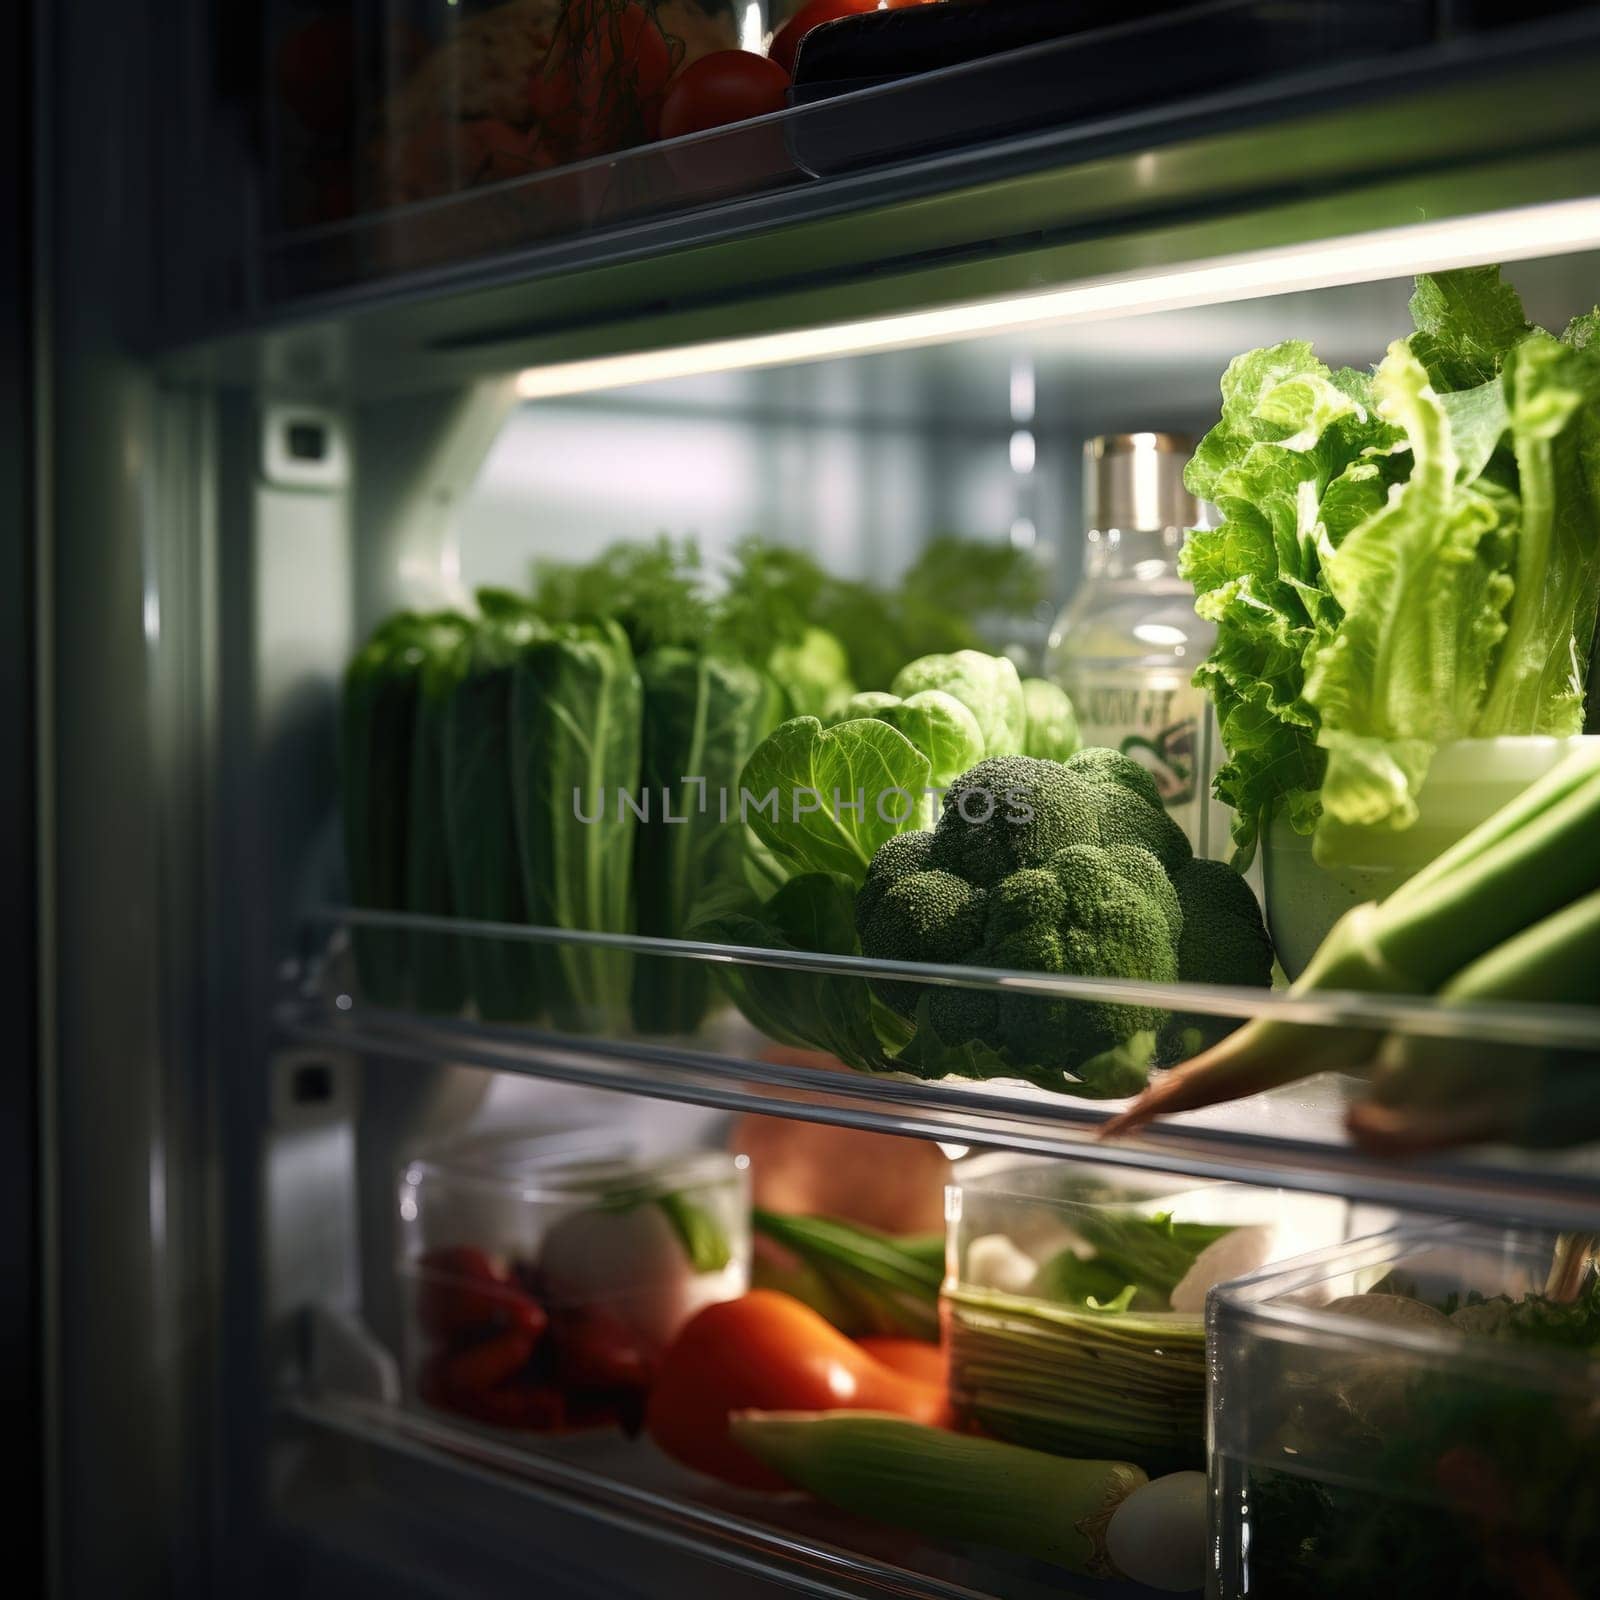 A refrigerator with vegetables and other food inside, AI by starush